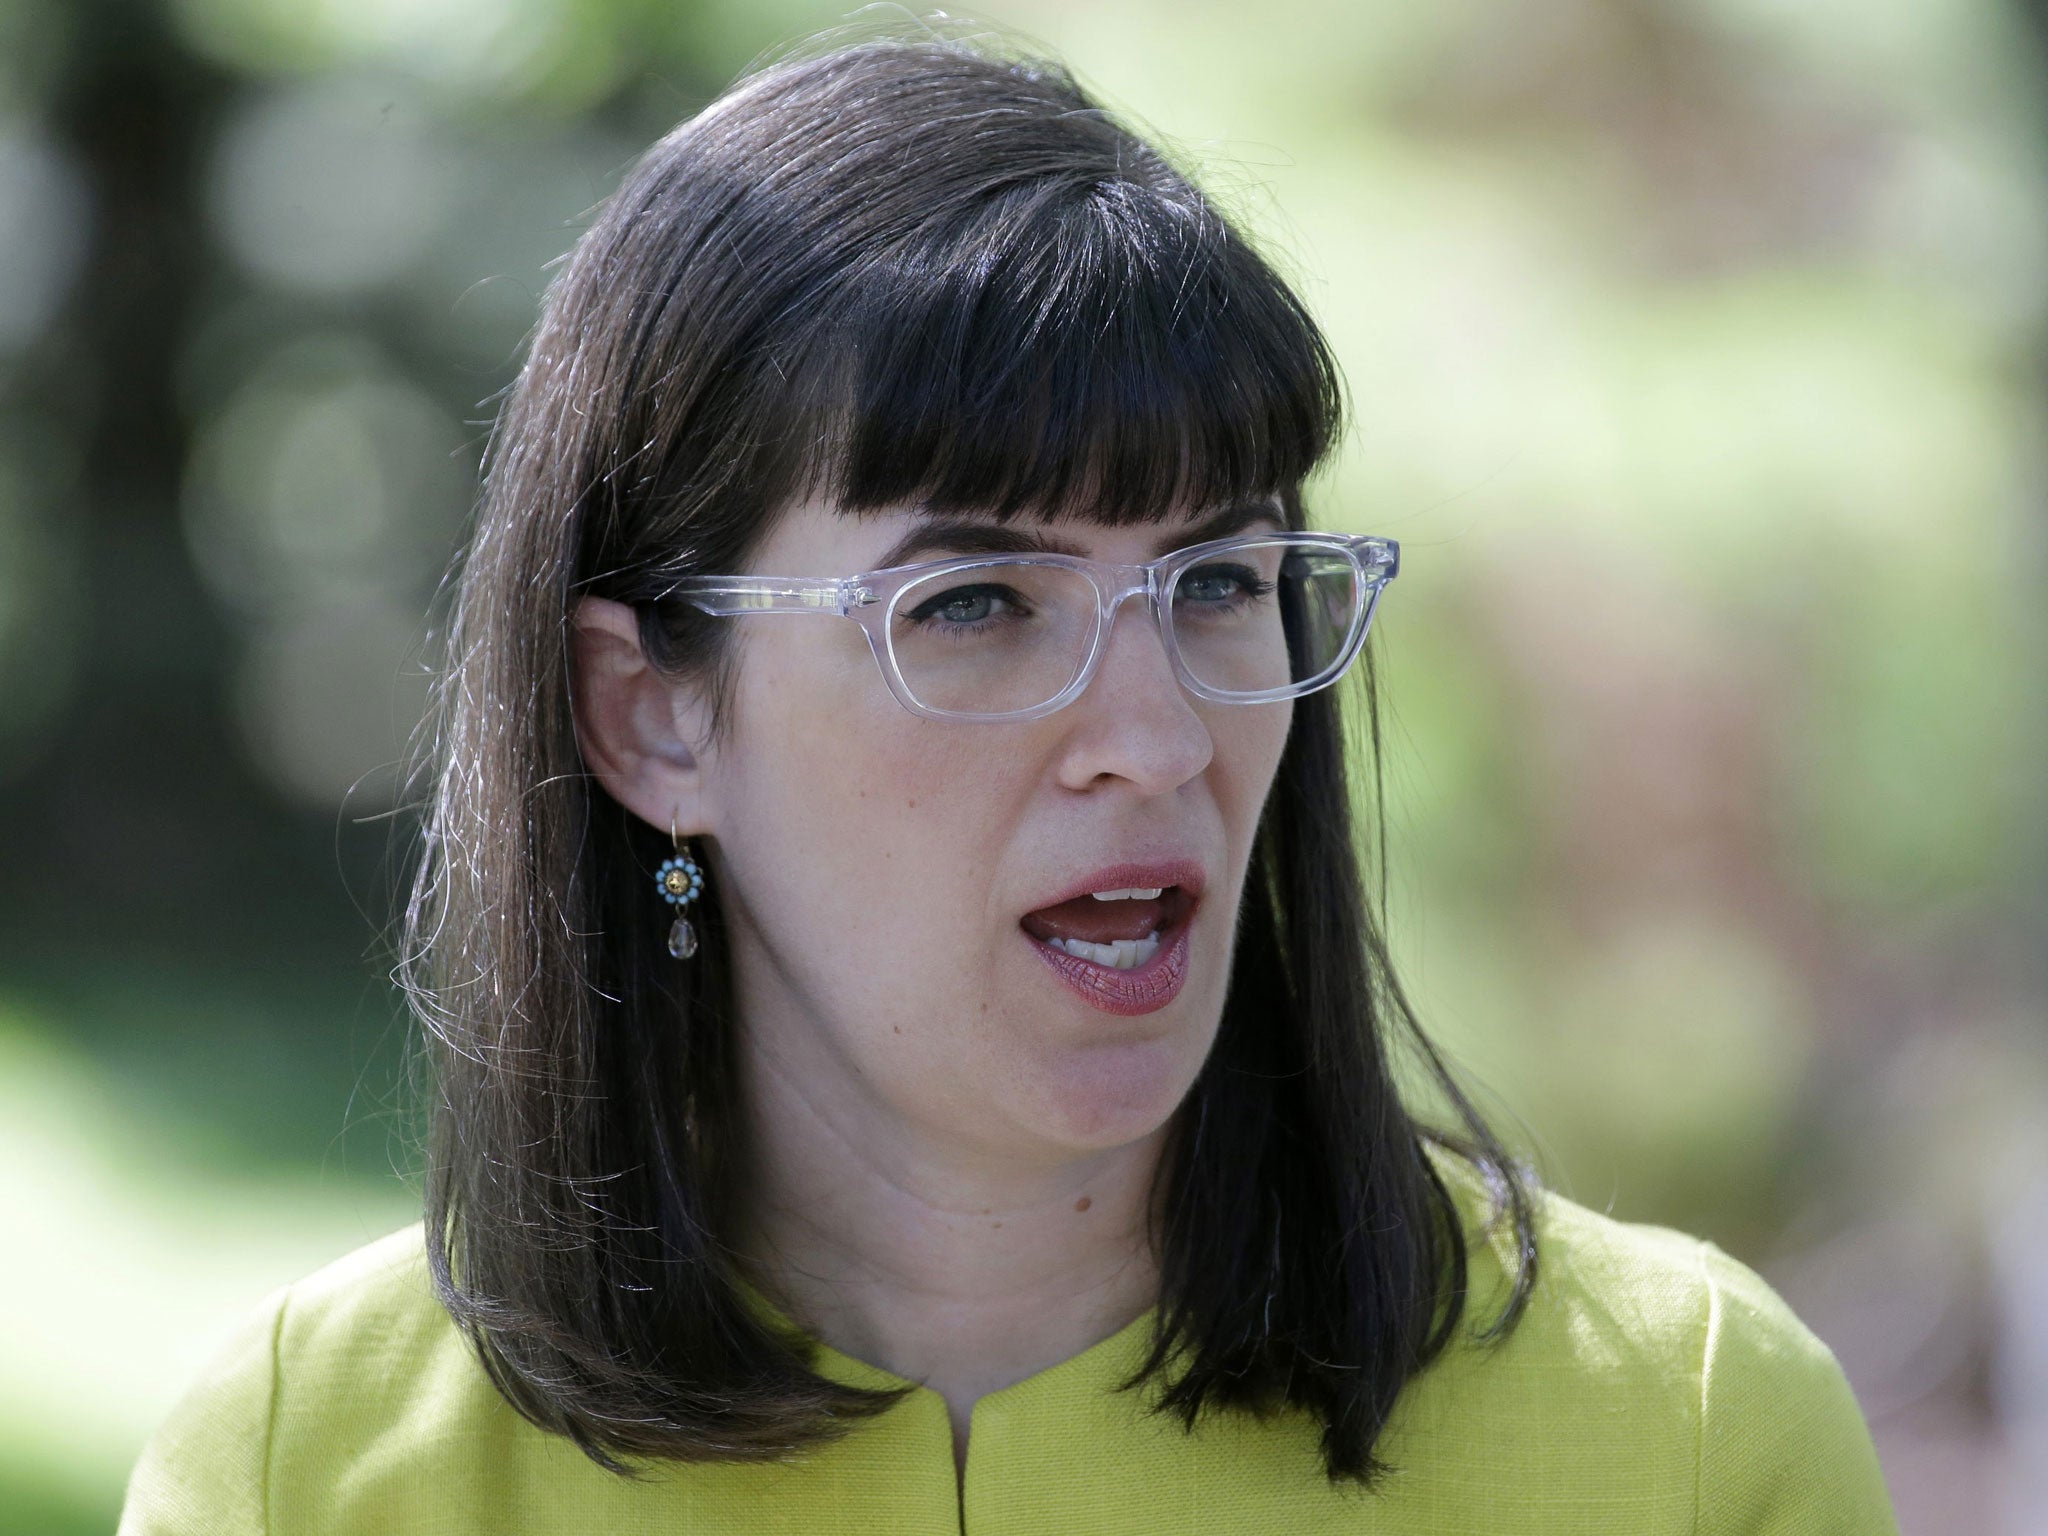 Mormon excommunicates women's rights activist Kate Kelly because of her campaign for female priests | Independent | Independent